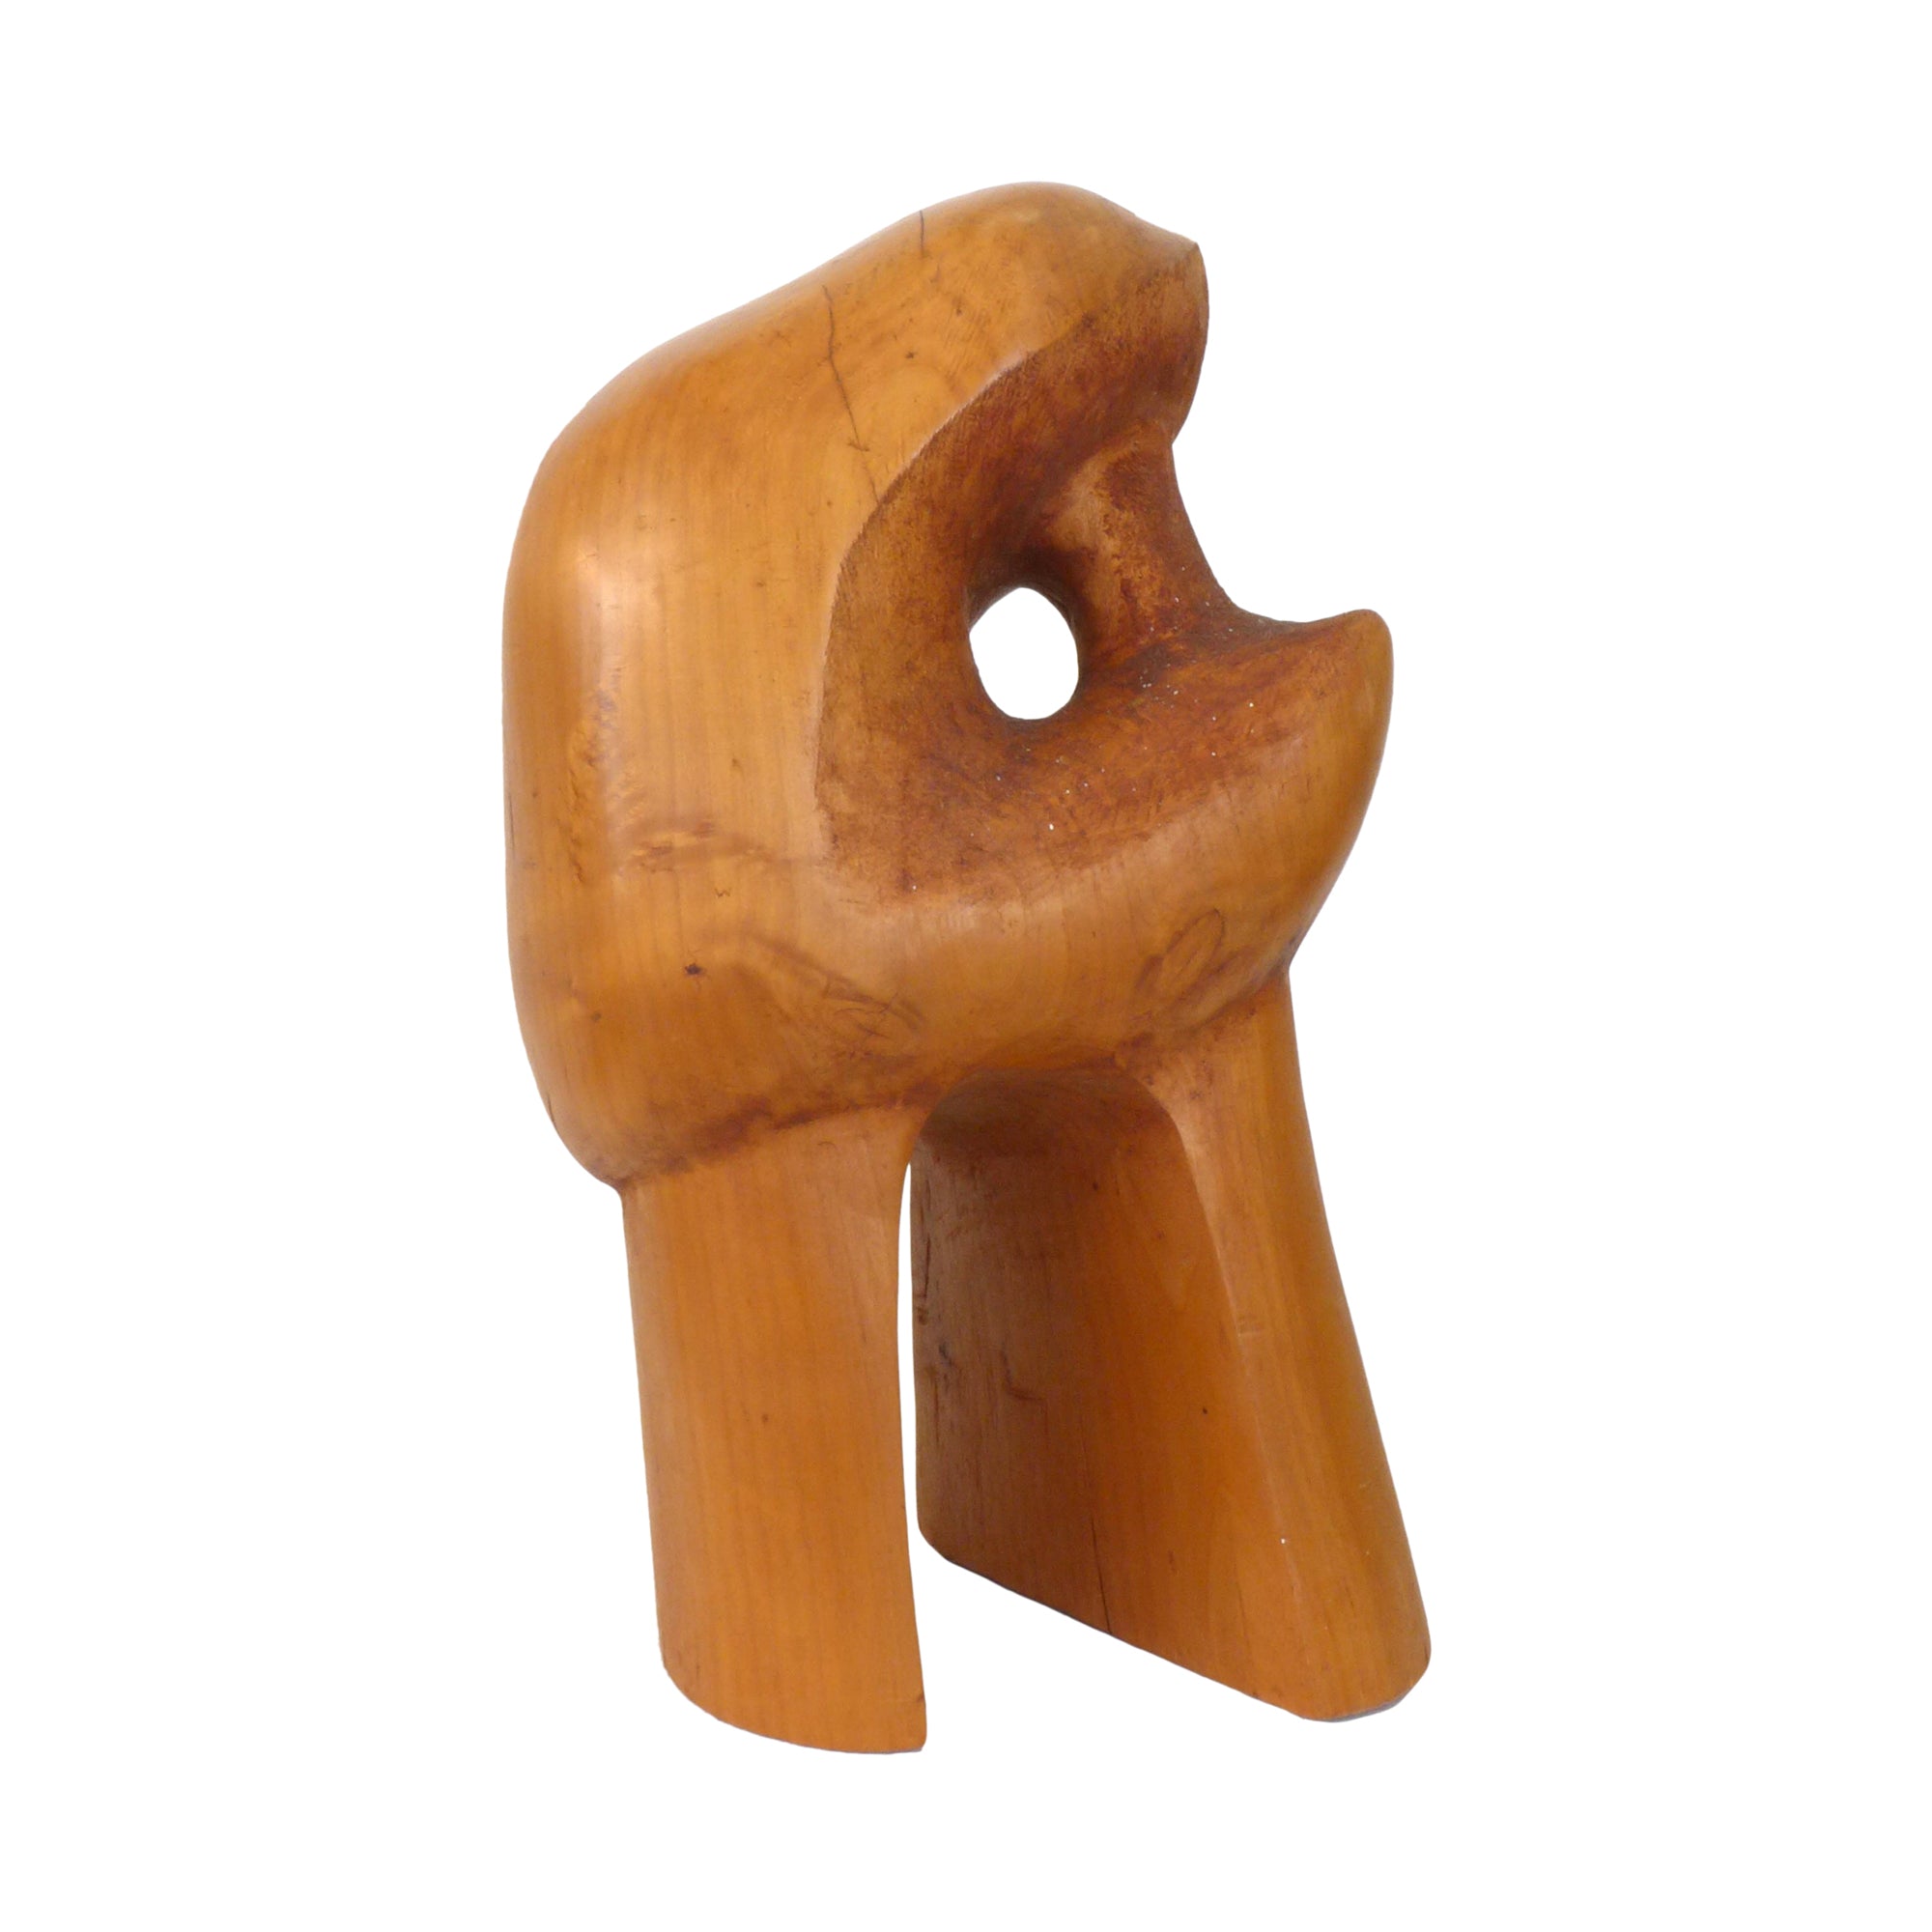 Biomorphic Abstract Carved Wood Sculpture